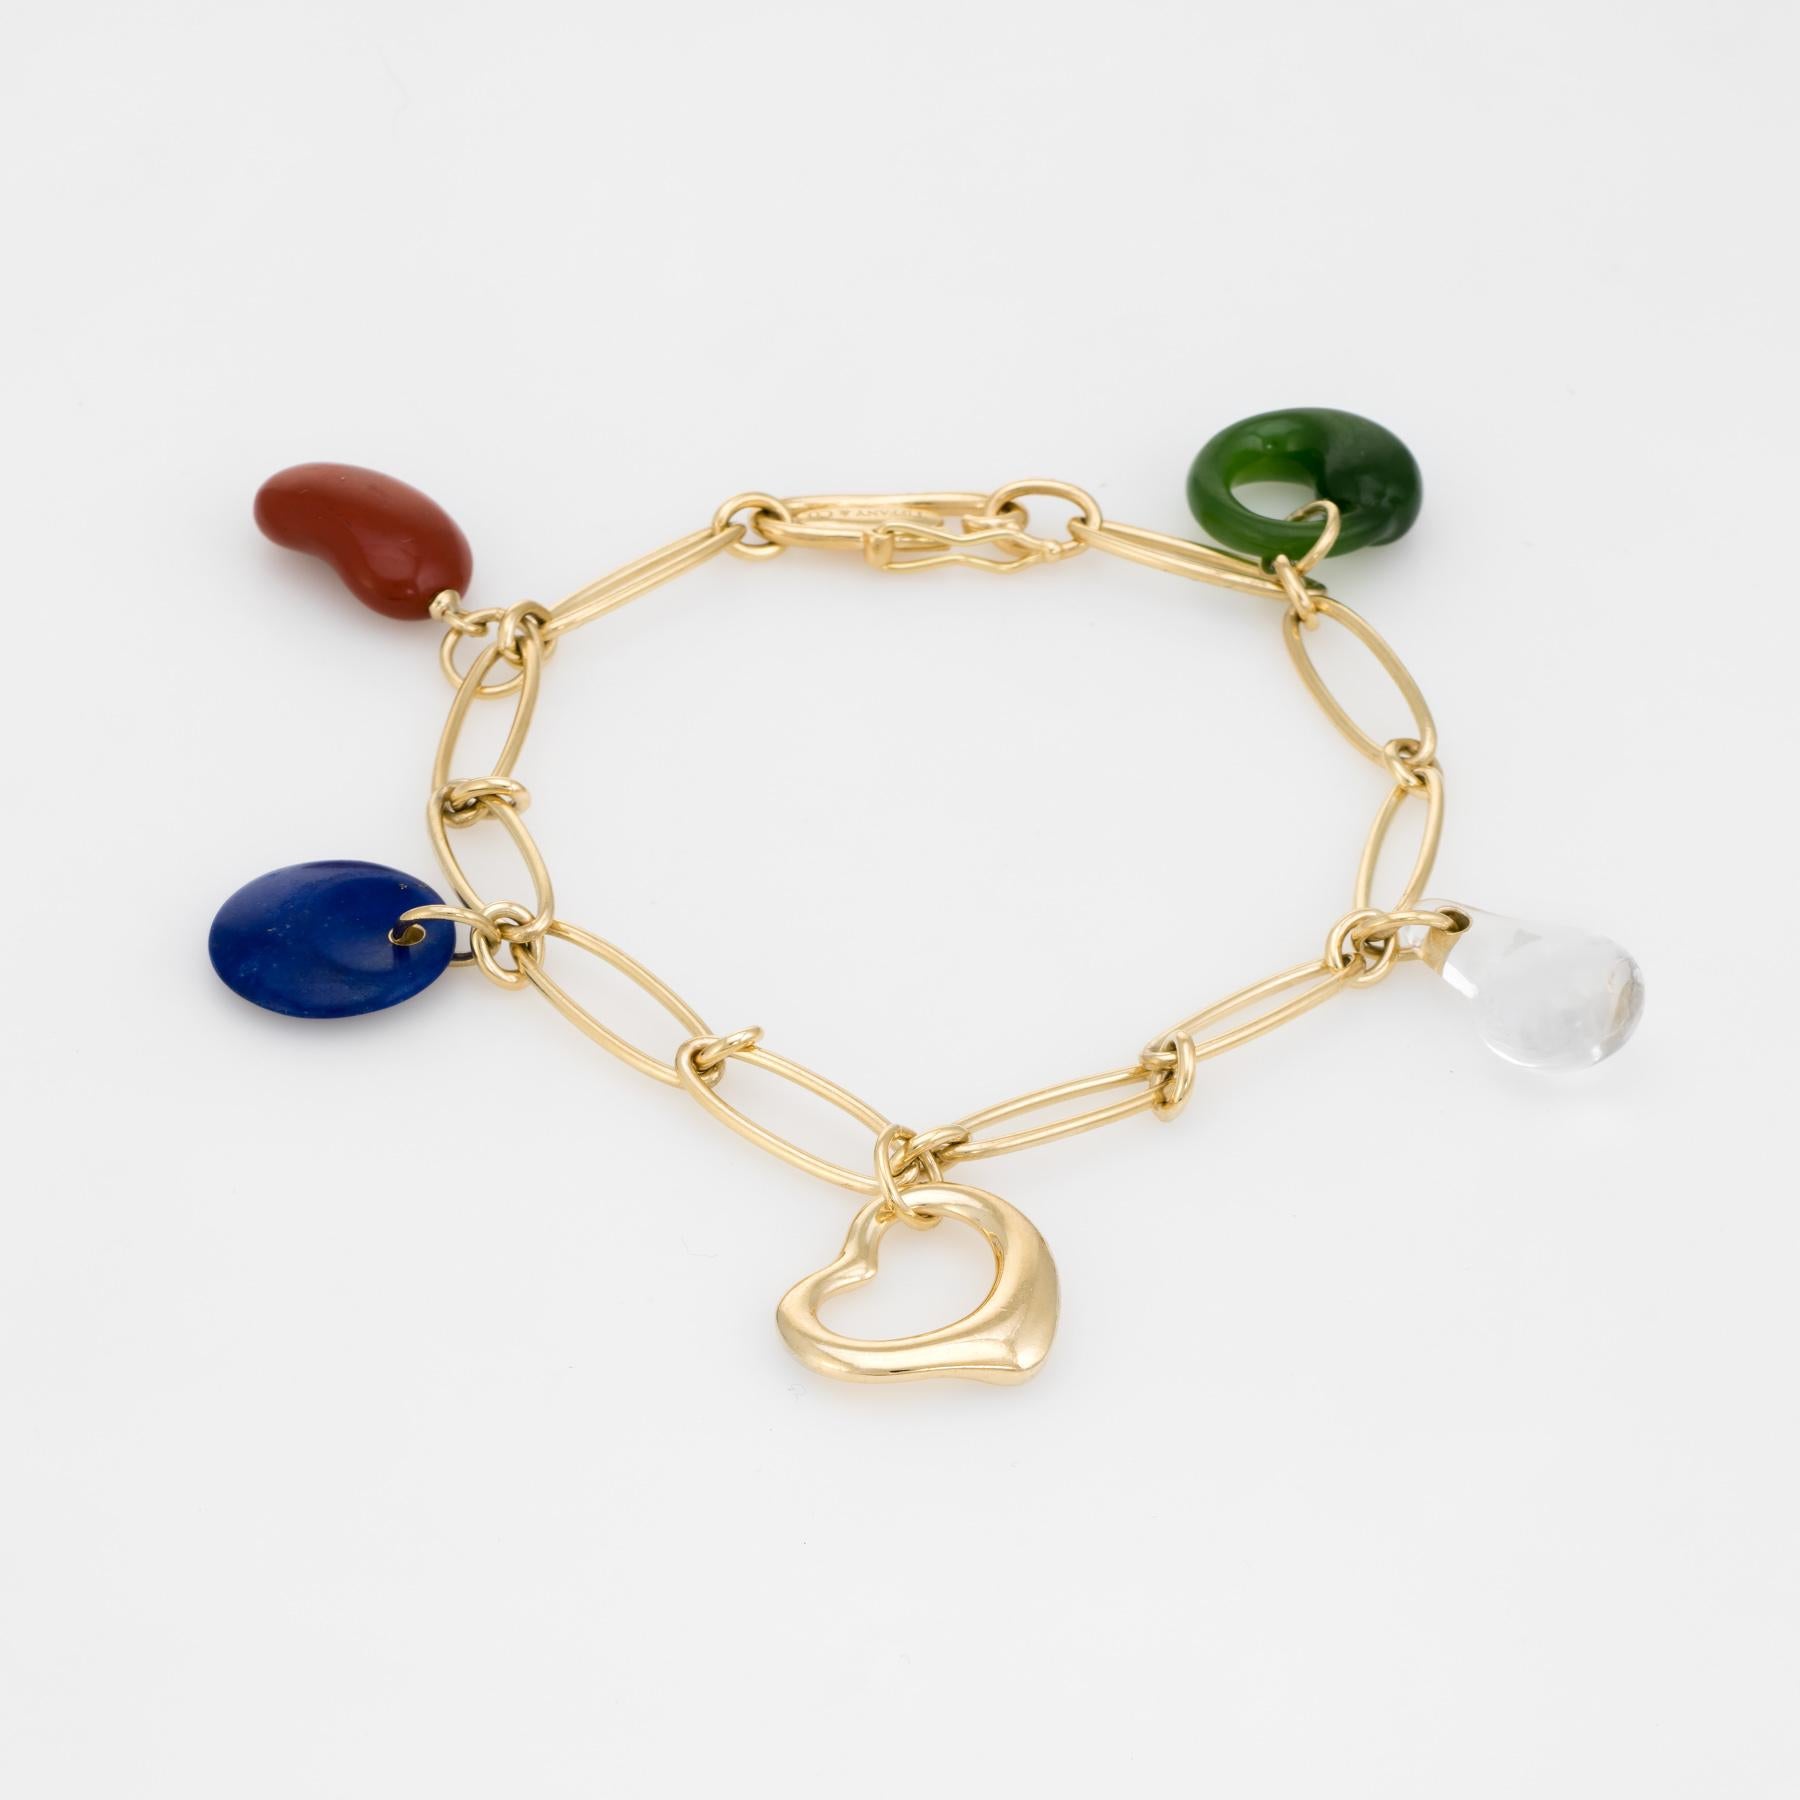 Elegant pre owned Tiffany & Co 5 charm bracelet, crafted in 18k yellow gold. 

The charms are comprised of the following materials: Bean is made of red jasper, the round disc is lapis lazuli, the teardrop is rock crystal and the eternal circle is